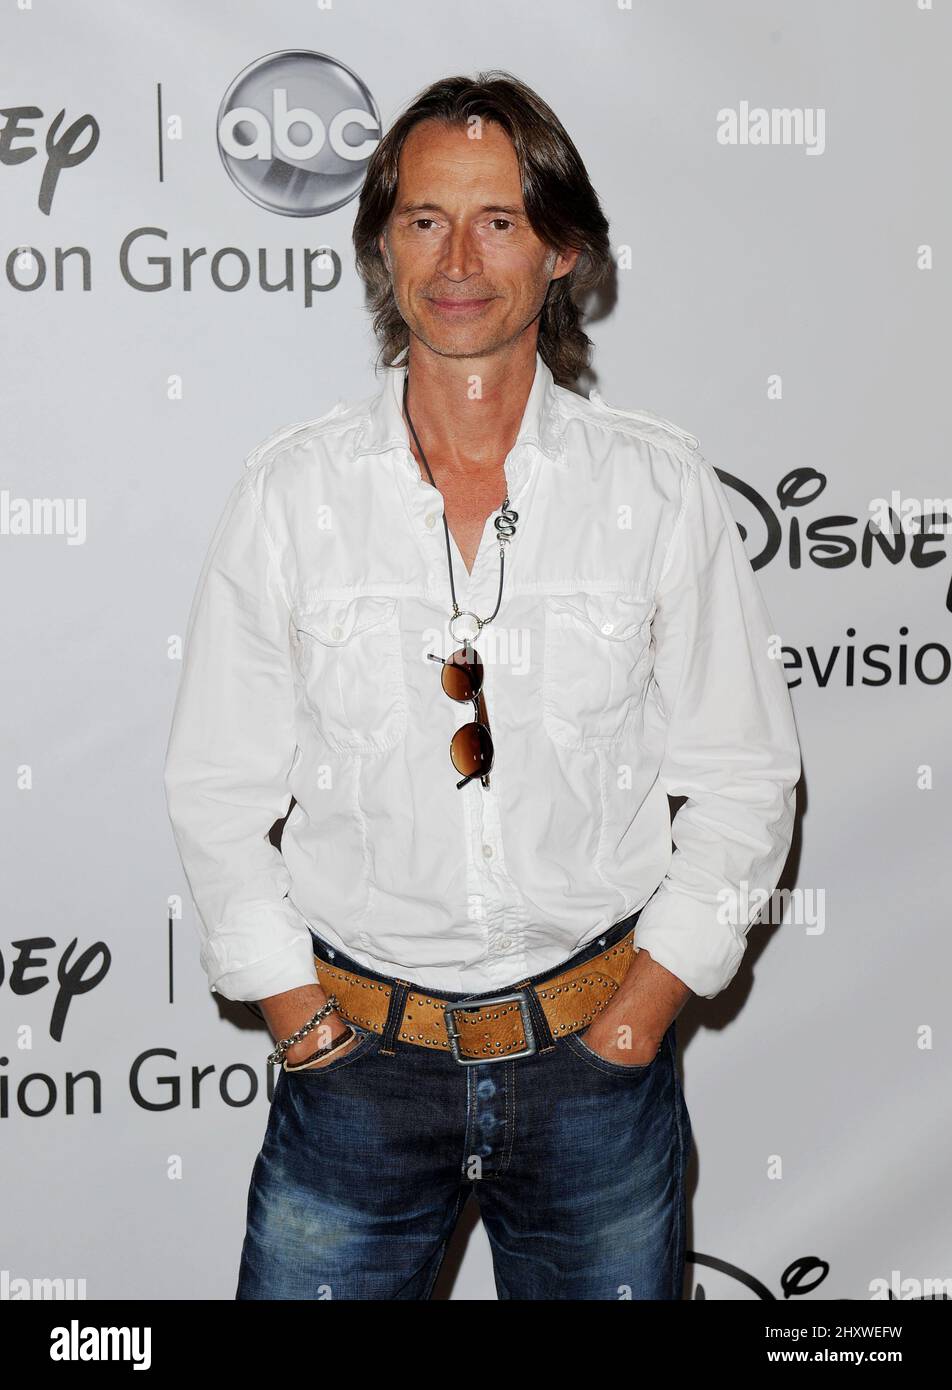 Robert Carlyle during the ABC Summer 2011 TCA showcase at the Hilton Hotel, Beverly Hills, California Stock Photo